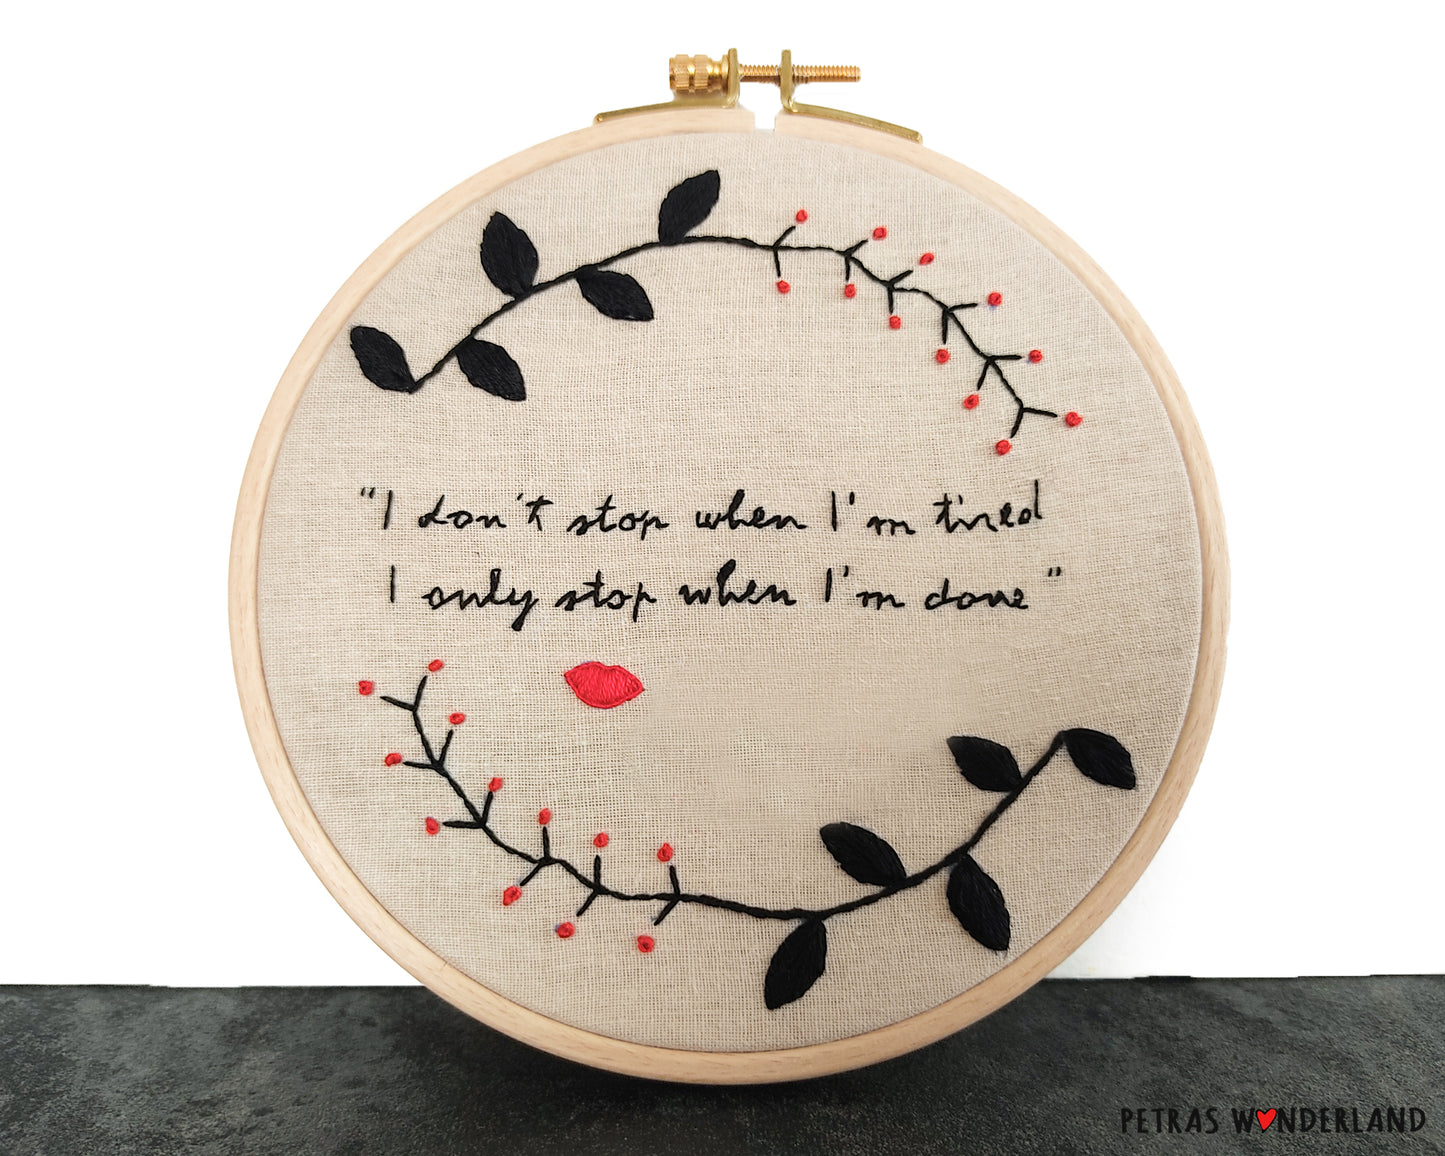 Actress Quote - PDF embroidery pattern and tutorial 06